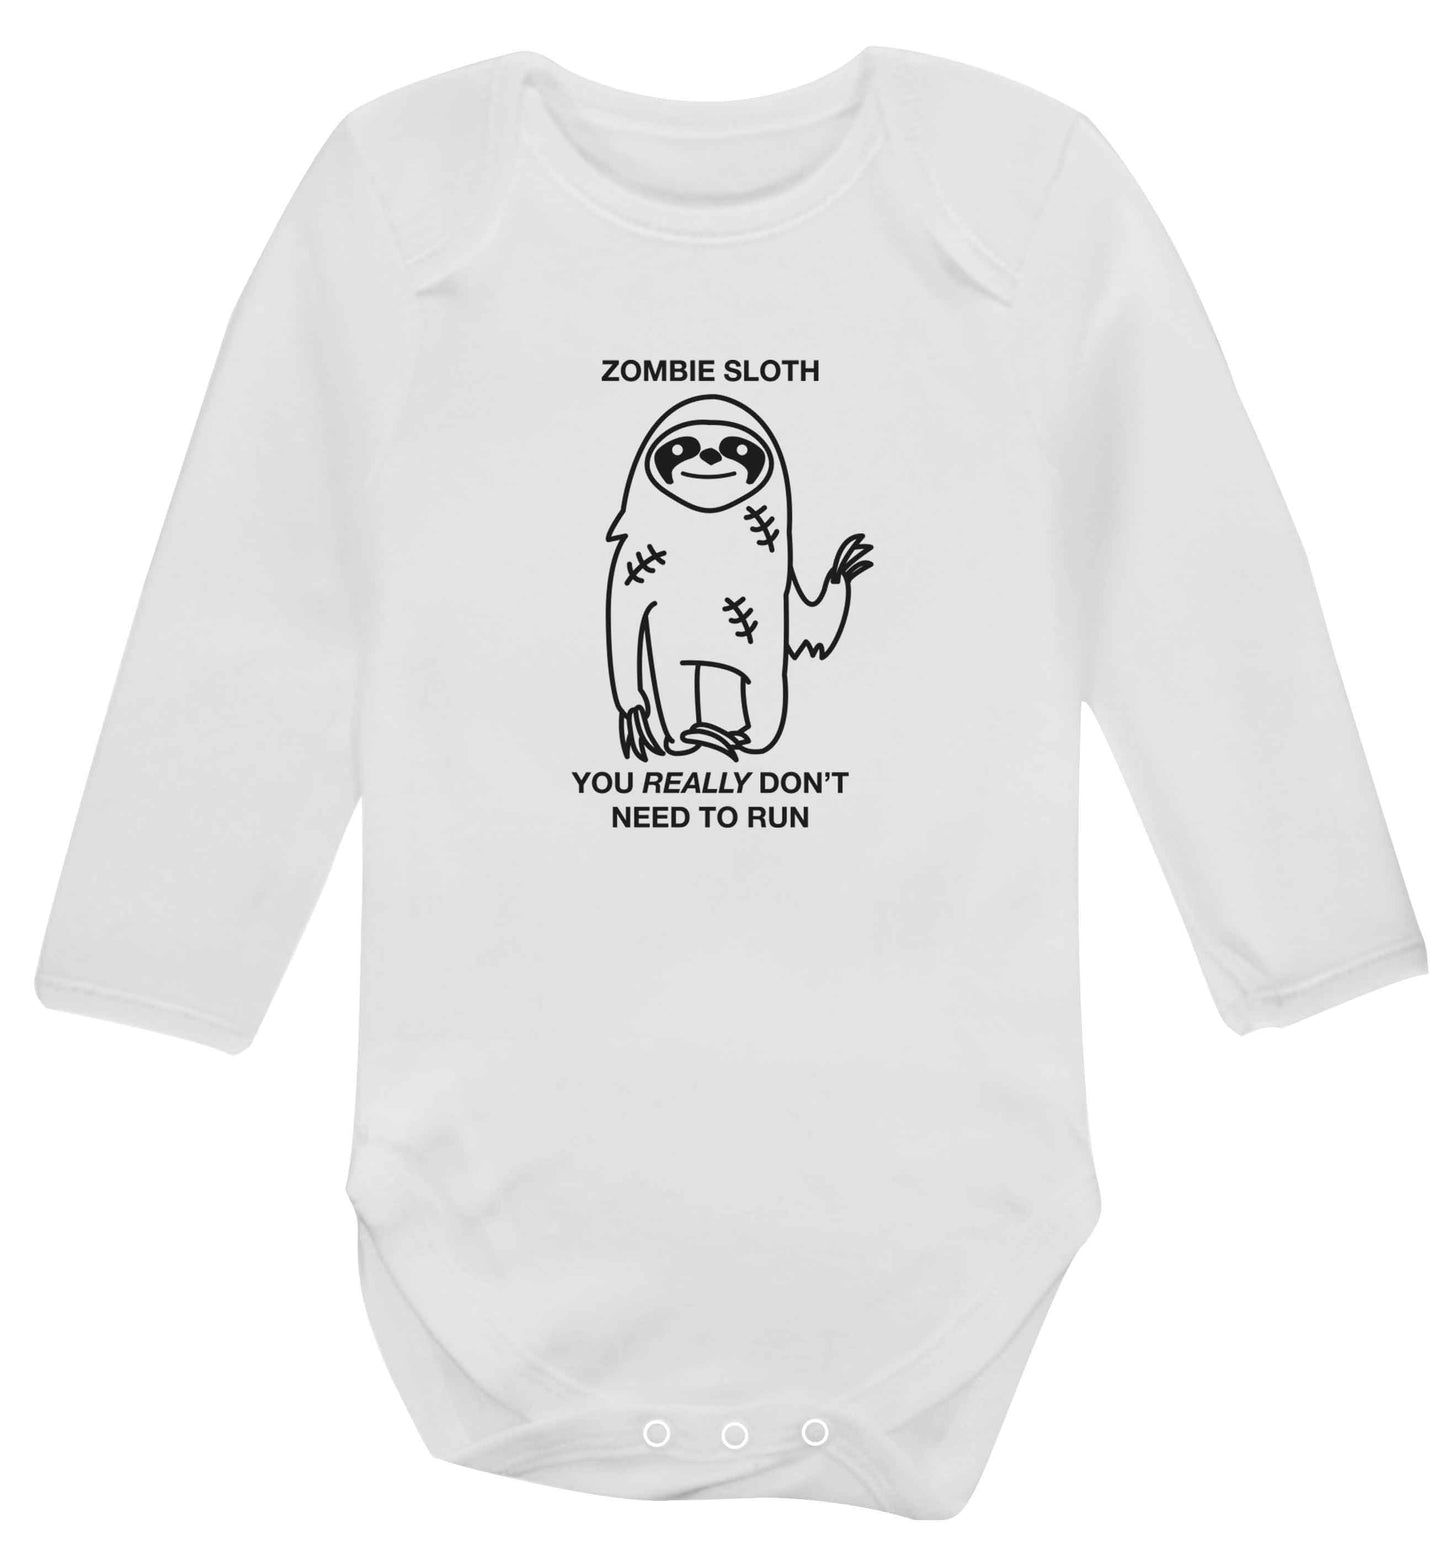 Zombie sloth you really don't need to run baby vest long sleeved white 6-12 months